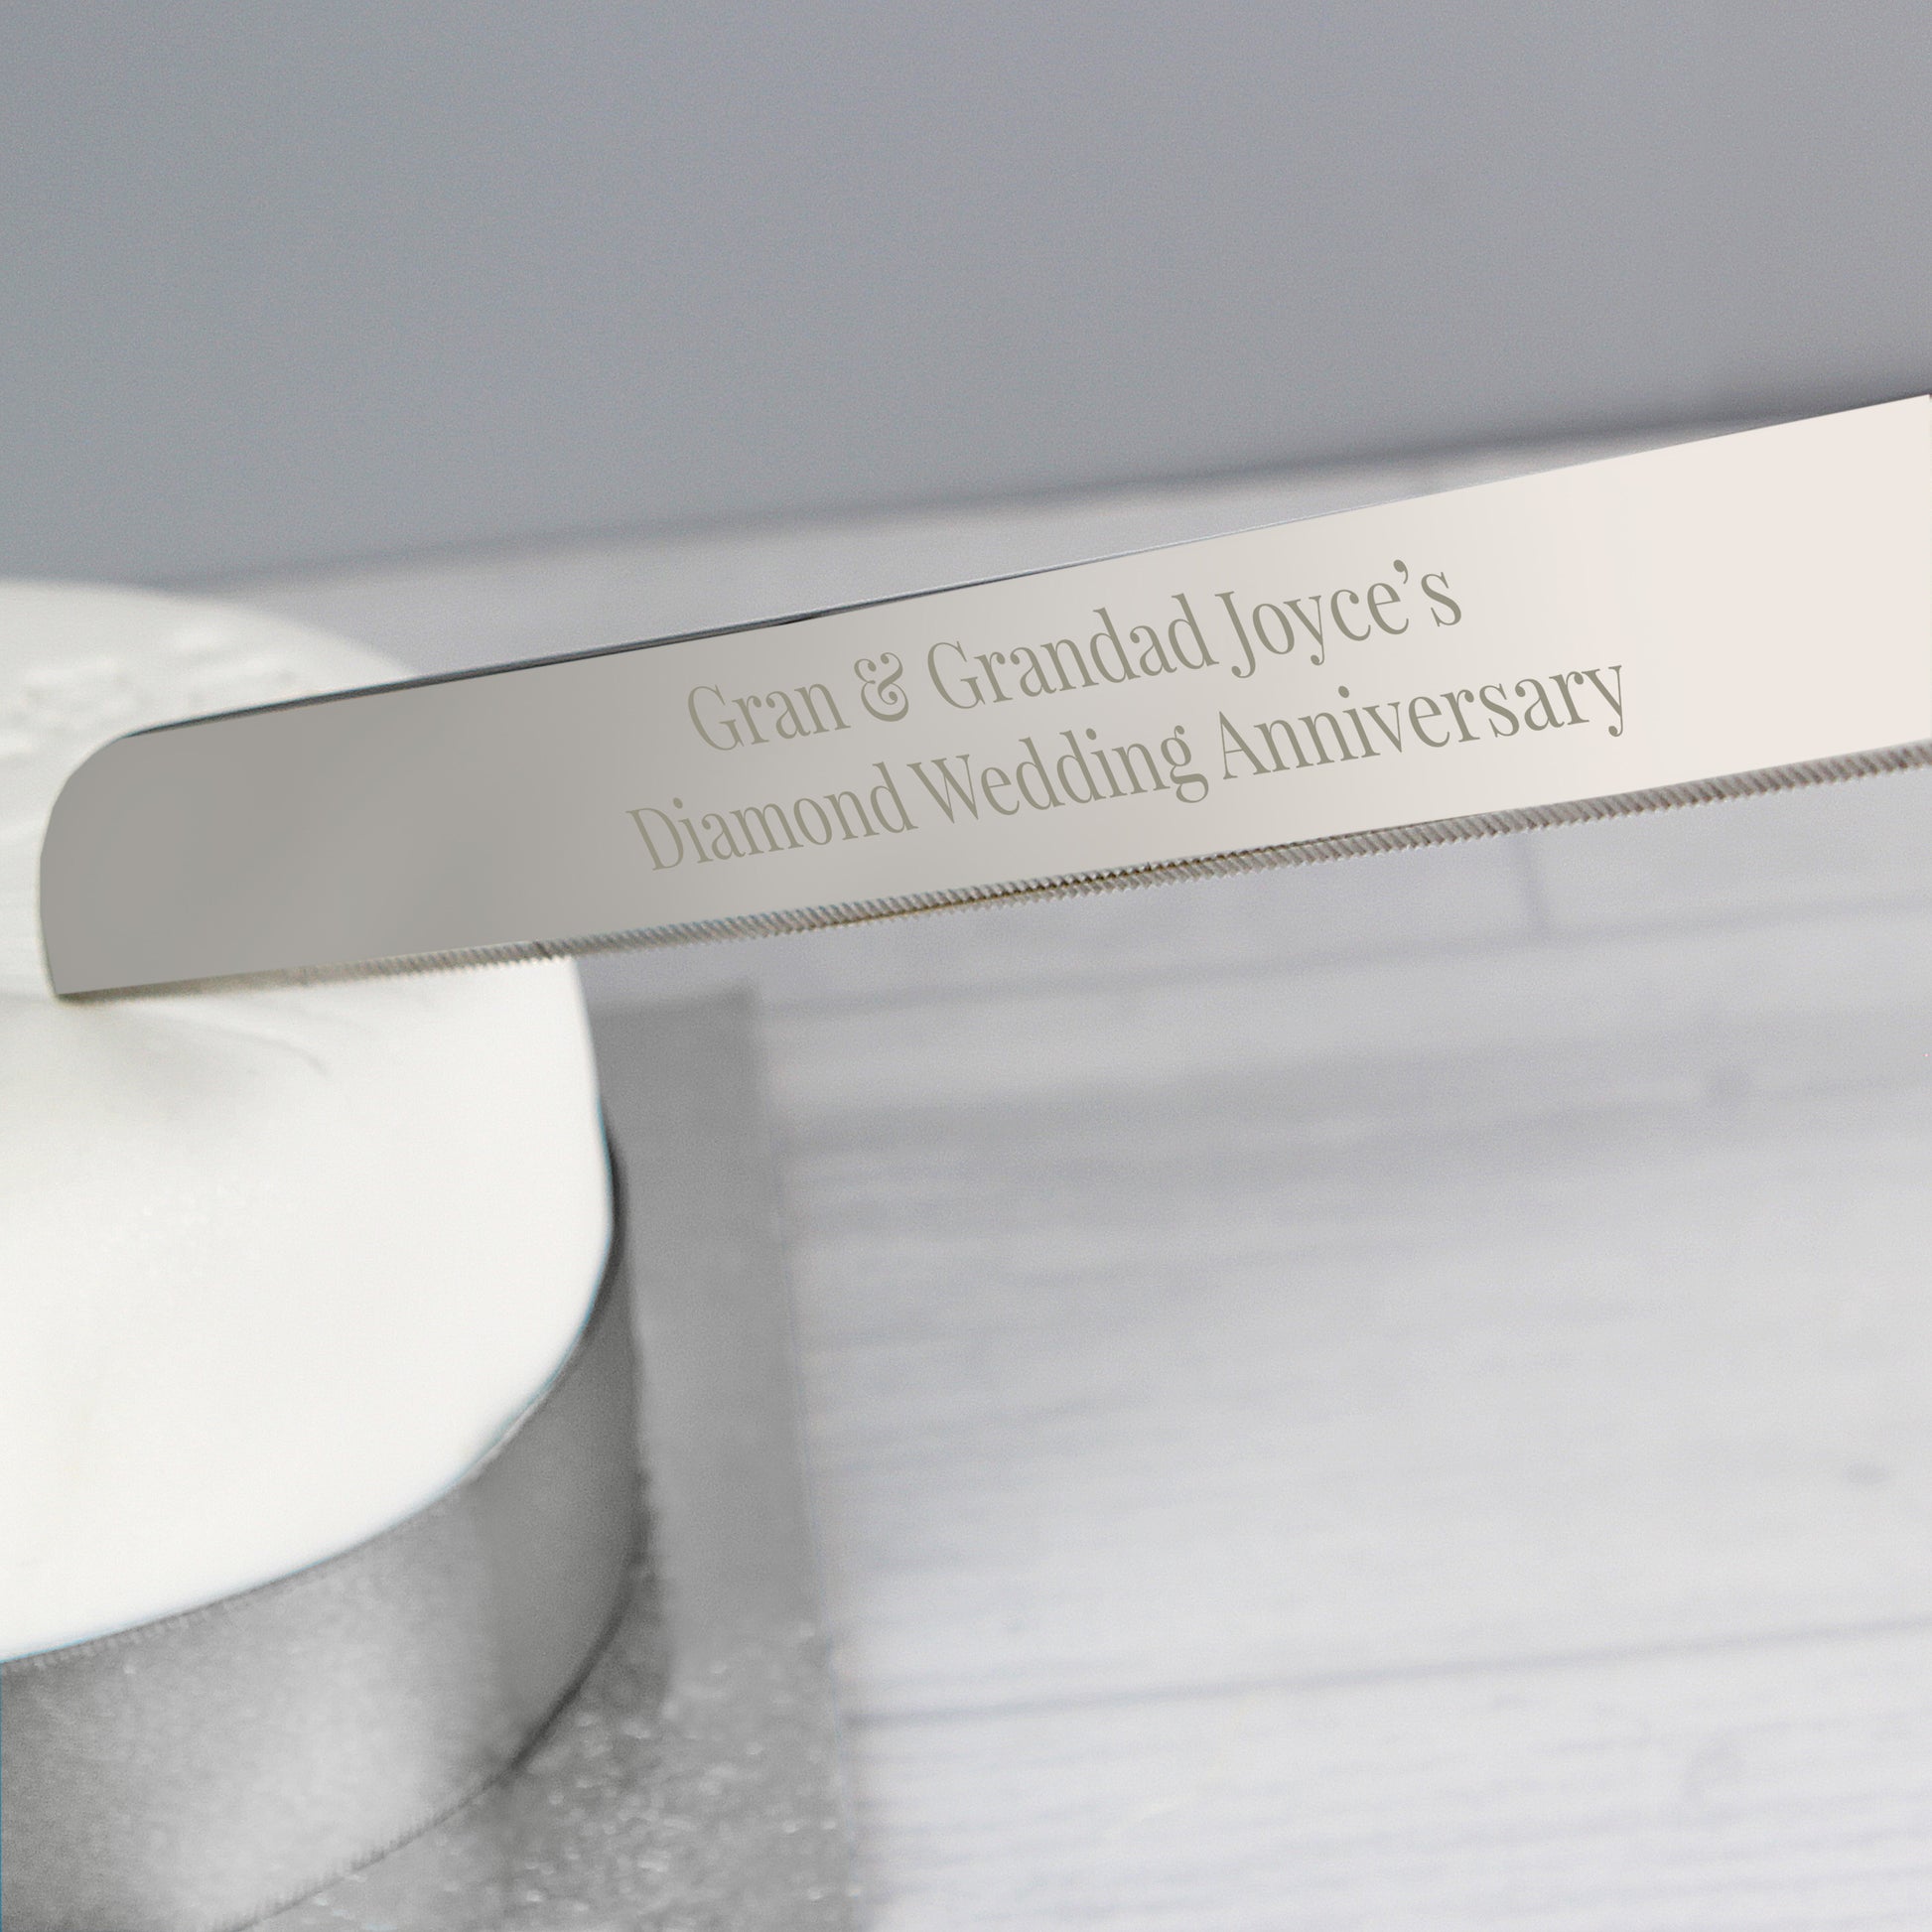 Personalised stainless steel cake knife engraved with the message of your choice